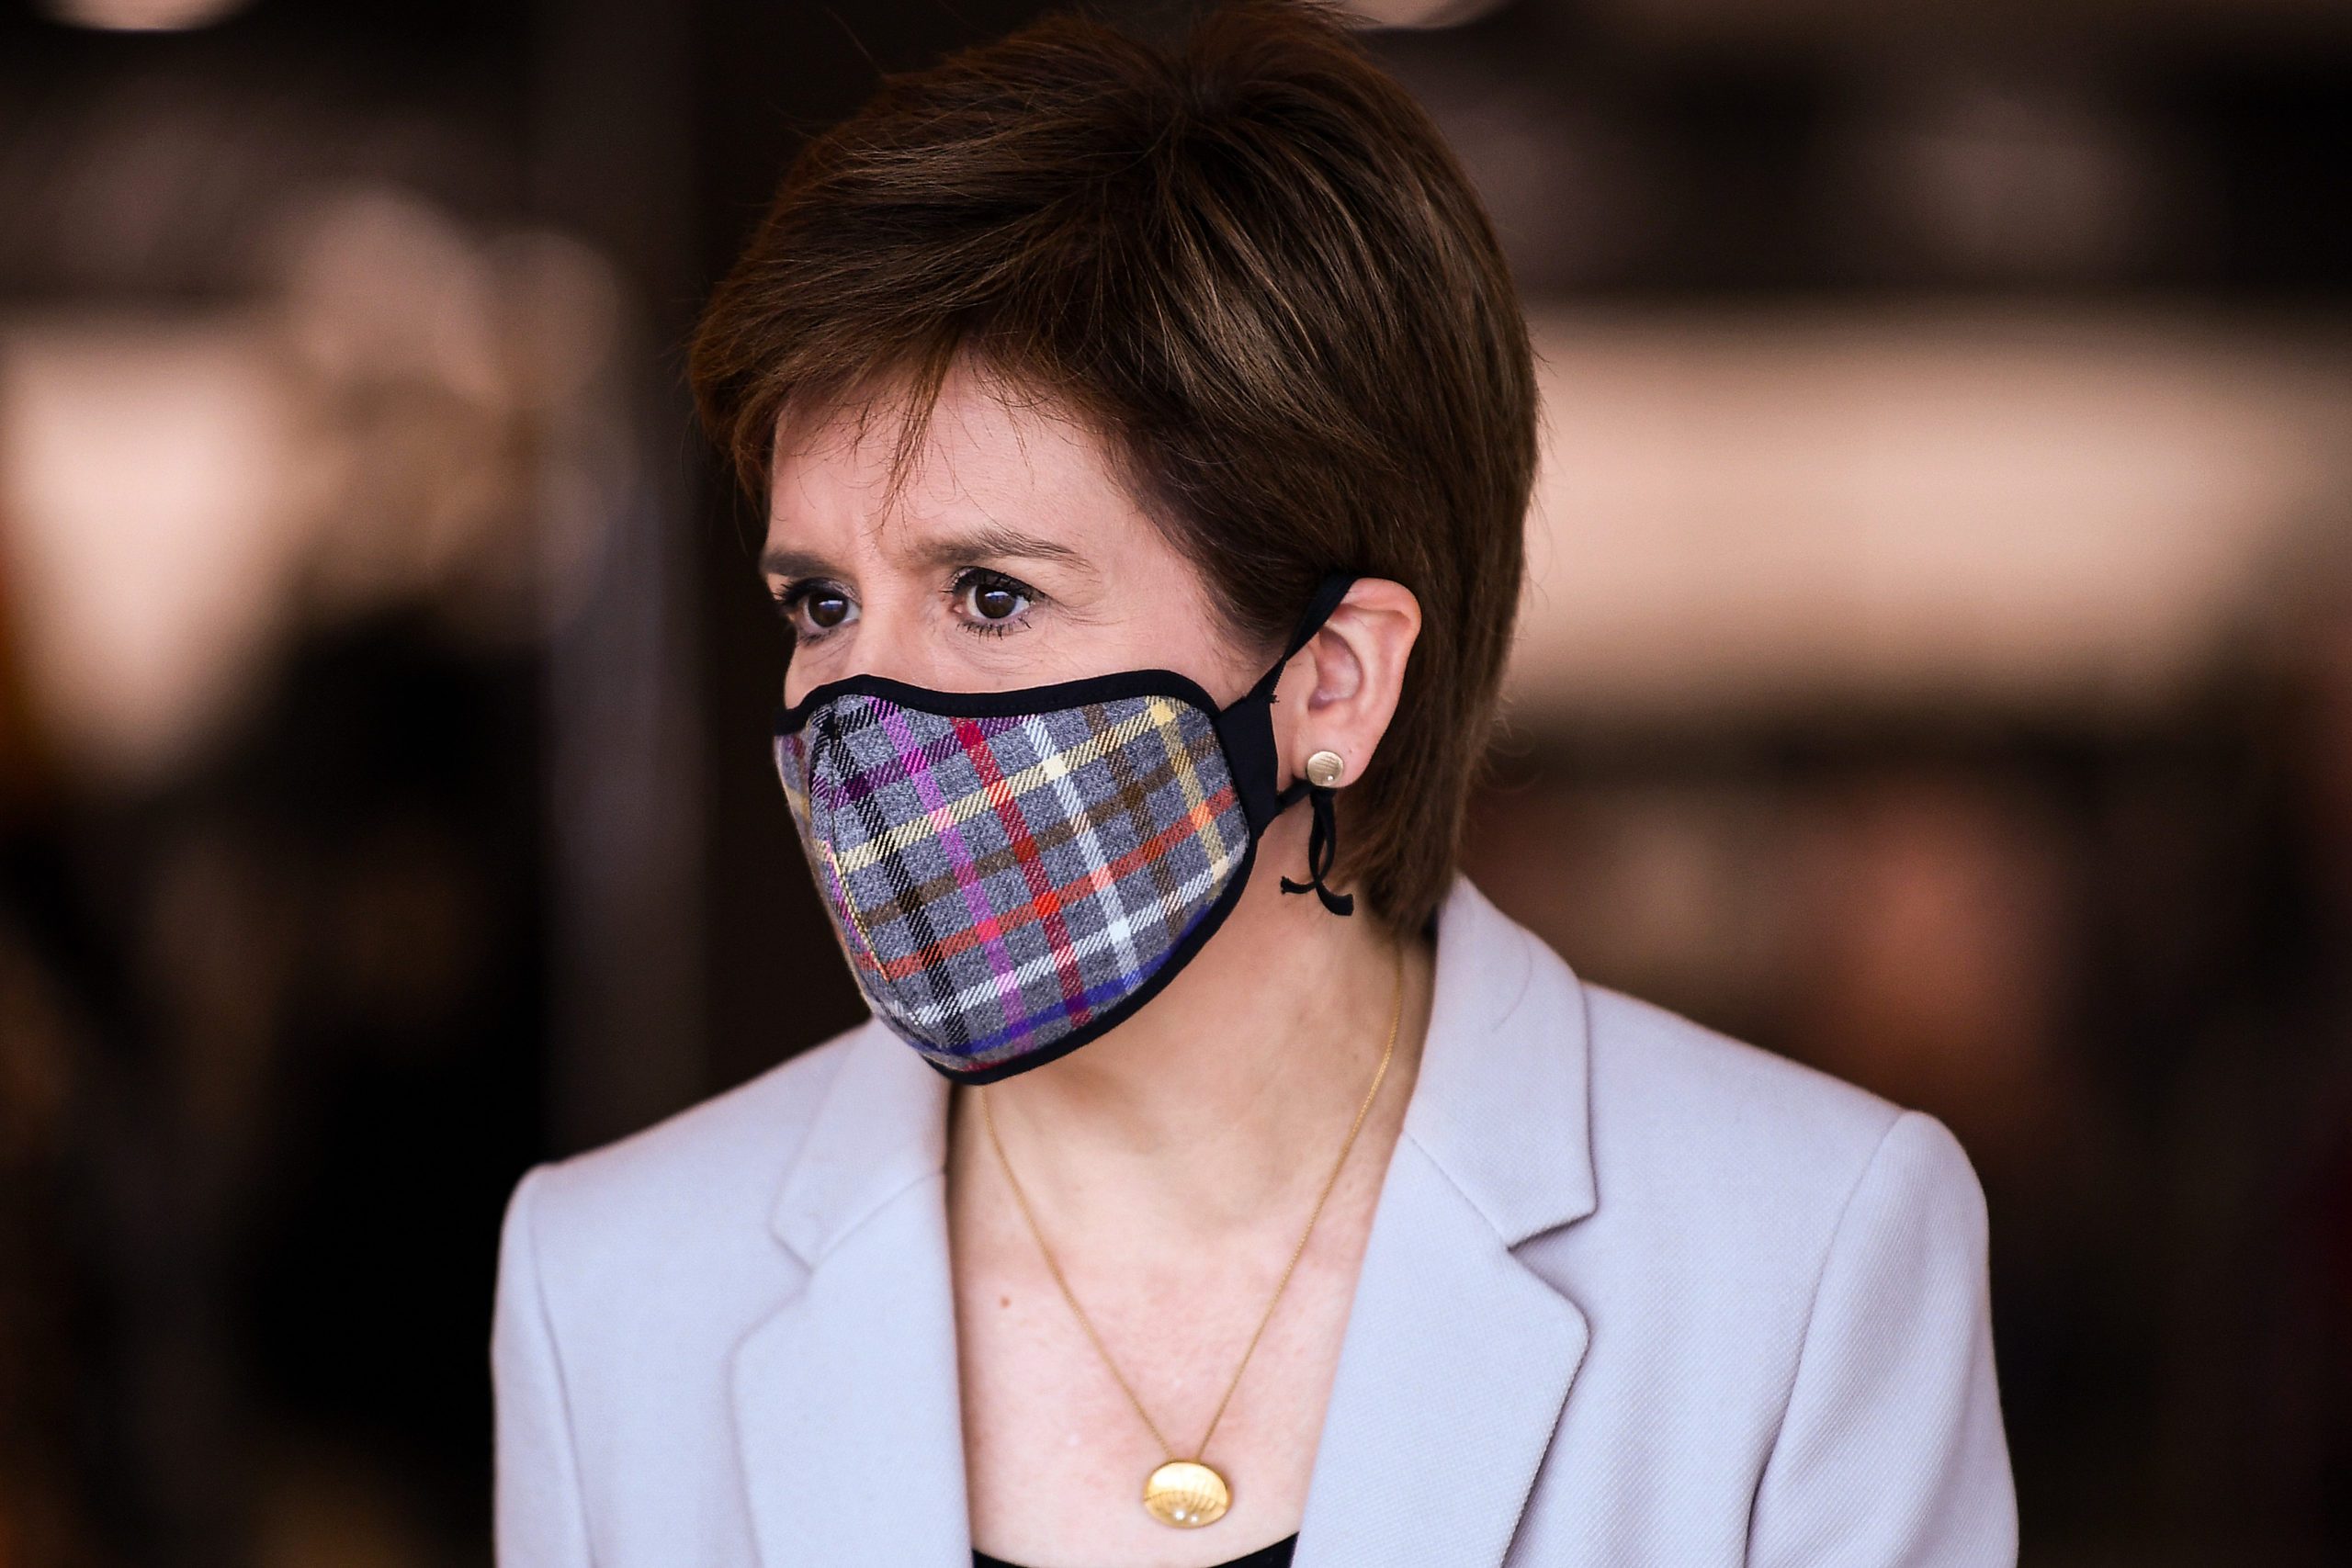 Nicola Sturgeon apologised after breaching Covid rules by taking off her face mask at a wake.